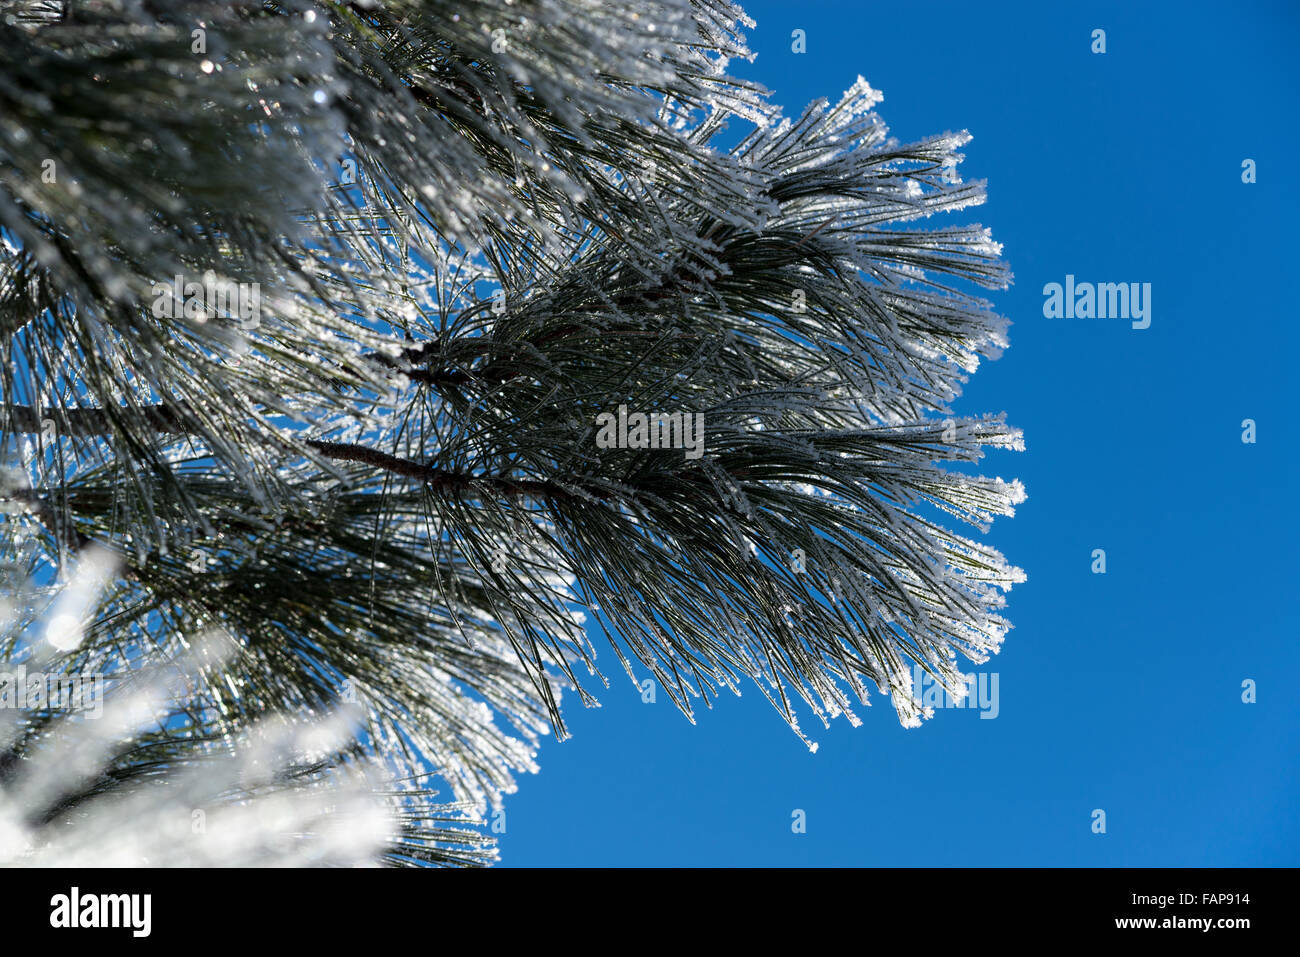 Hoar frost on Ponderosa pine branches in Oregon's Wallowa Valley. Stock Photo